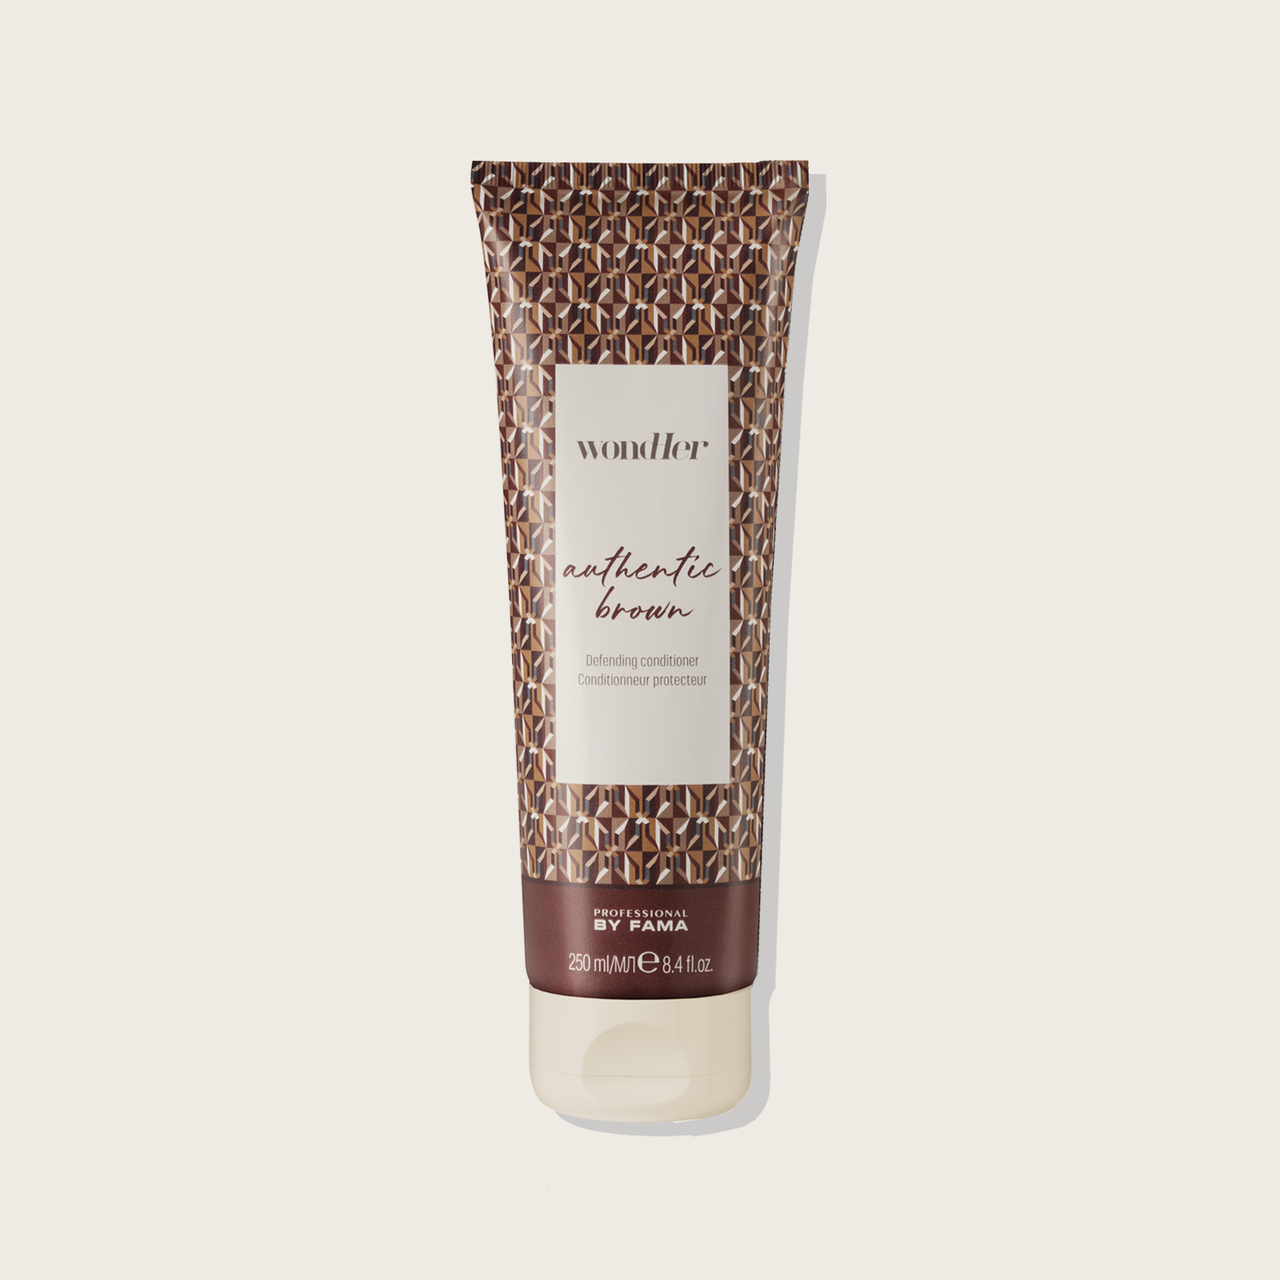 By Fama WONDHER AUTHENTIC BROWN DEFENDING CONDITIONER 